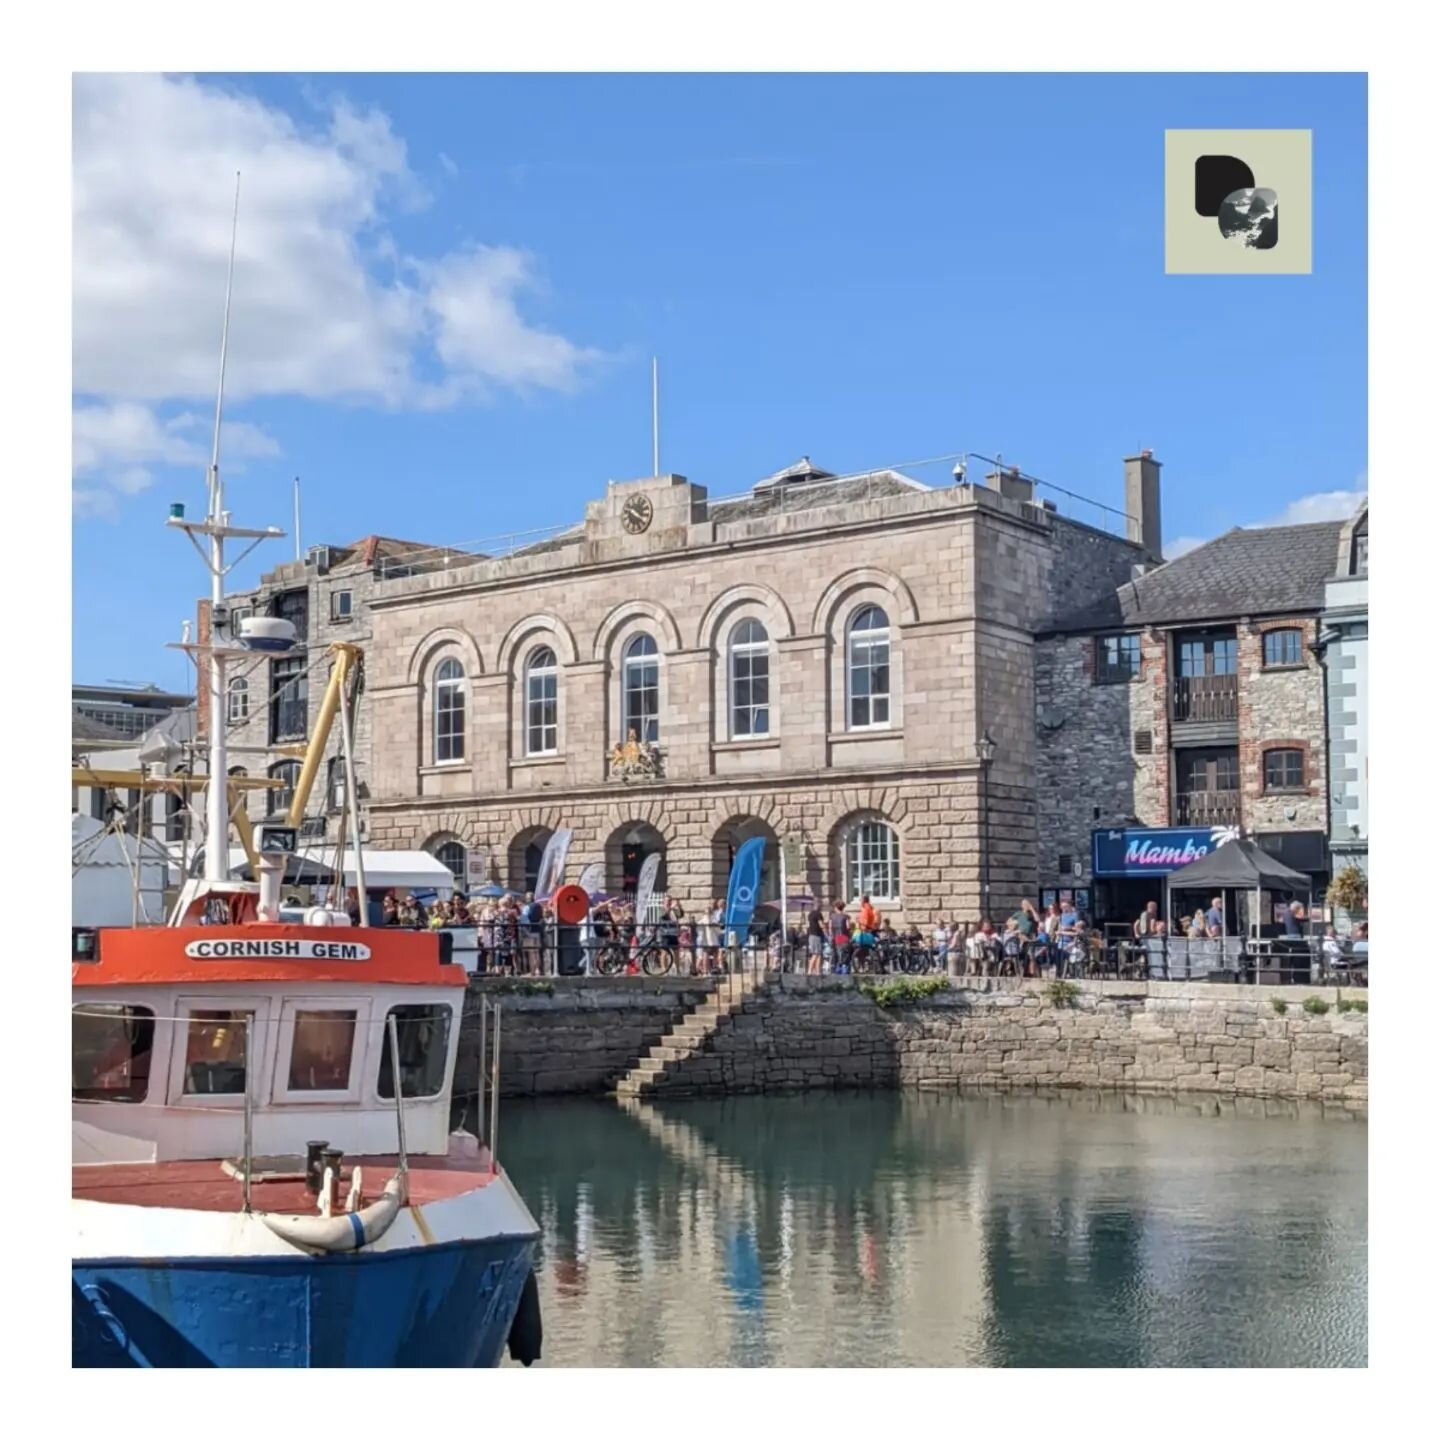 ⚪ SUNDAY ⚪

The team at Devon and Cornwall Planning Consultants spent a glorious Sunday afternoon down at the #plymouthseafoodfestival 

So much to do, so much to see, so much to eat! 

Such a great event @visitplymouth 

#plymouth #devon #cornwall #